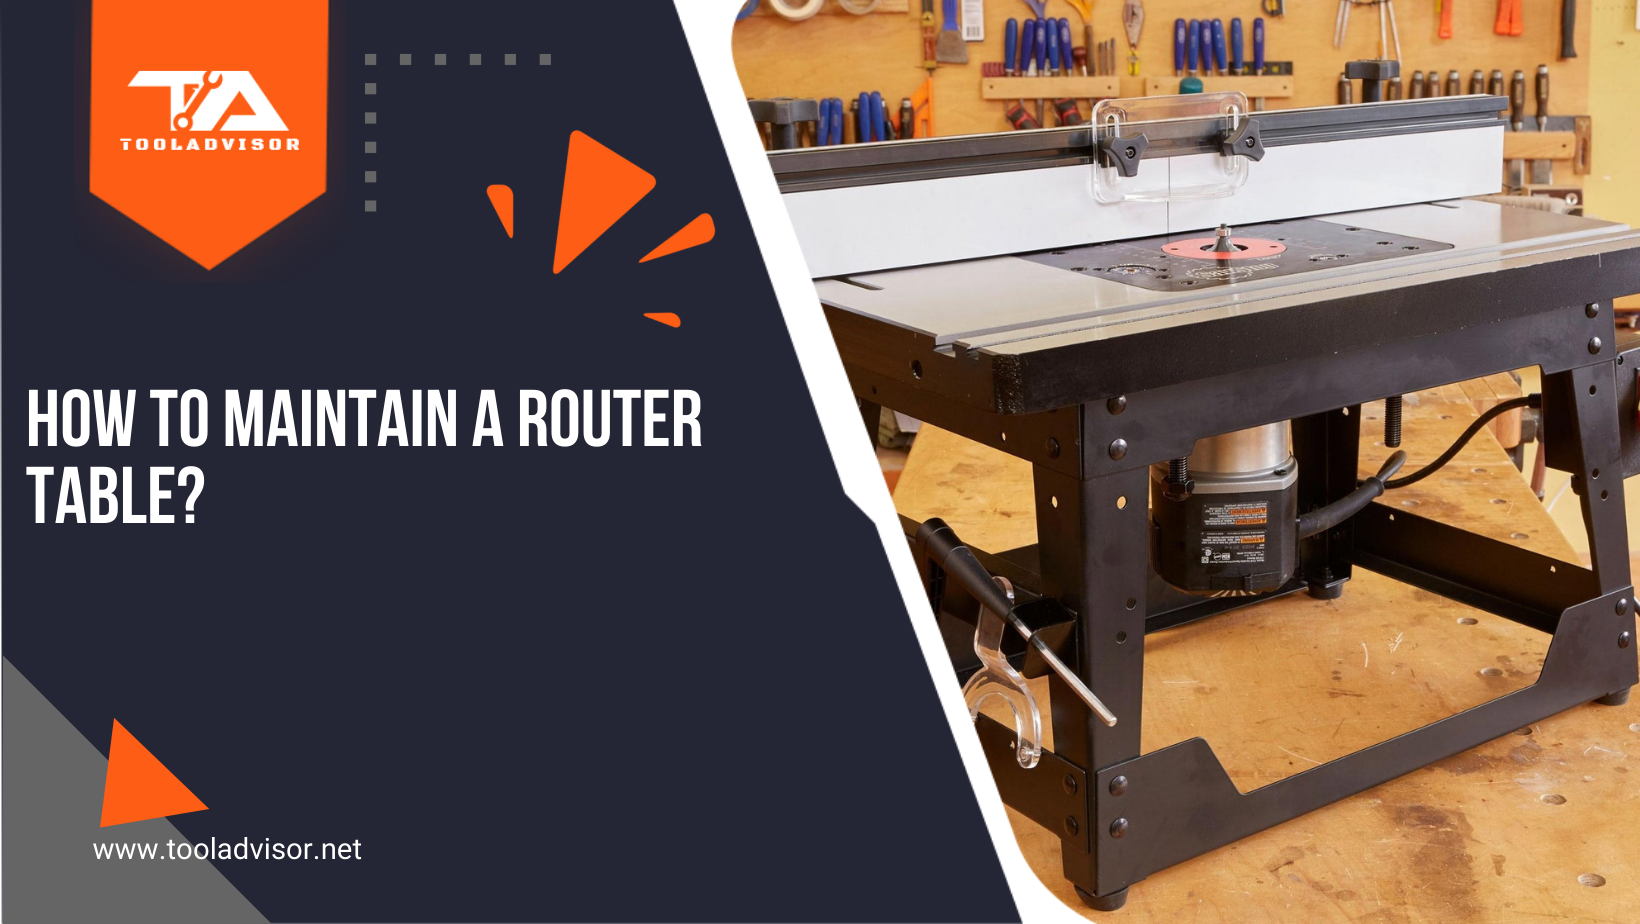 How to Maintain a Router Table